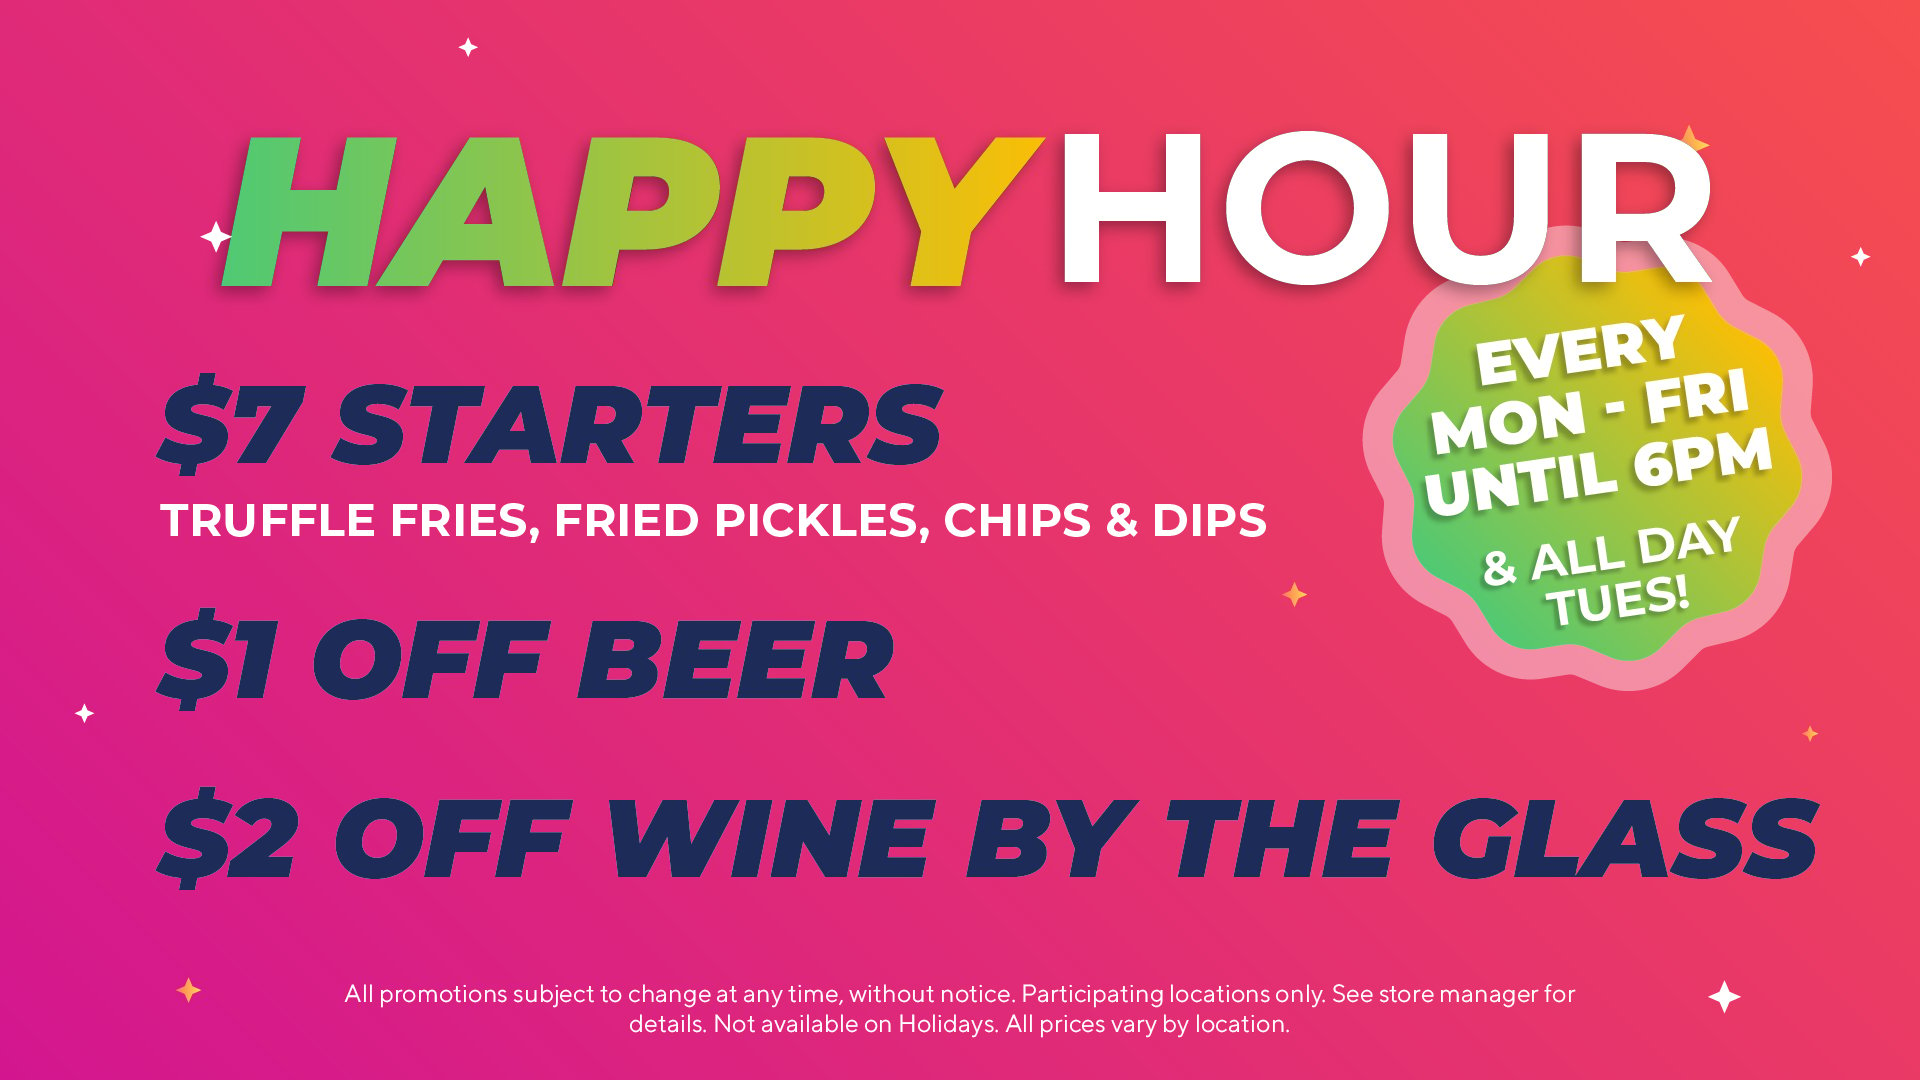 Value-priced happy hour options